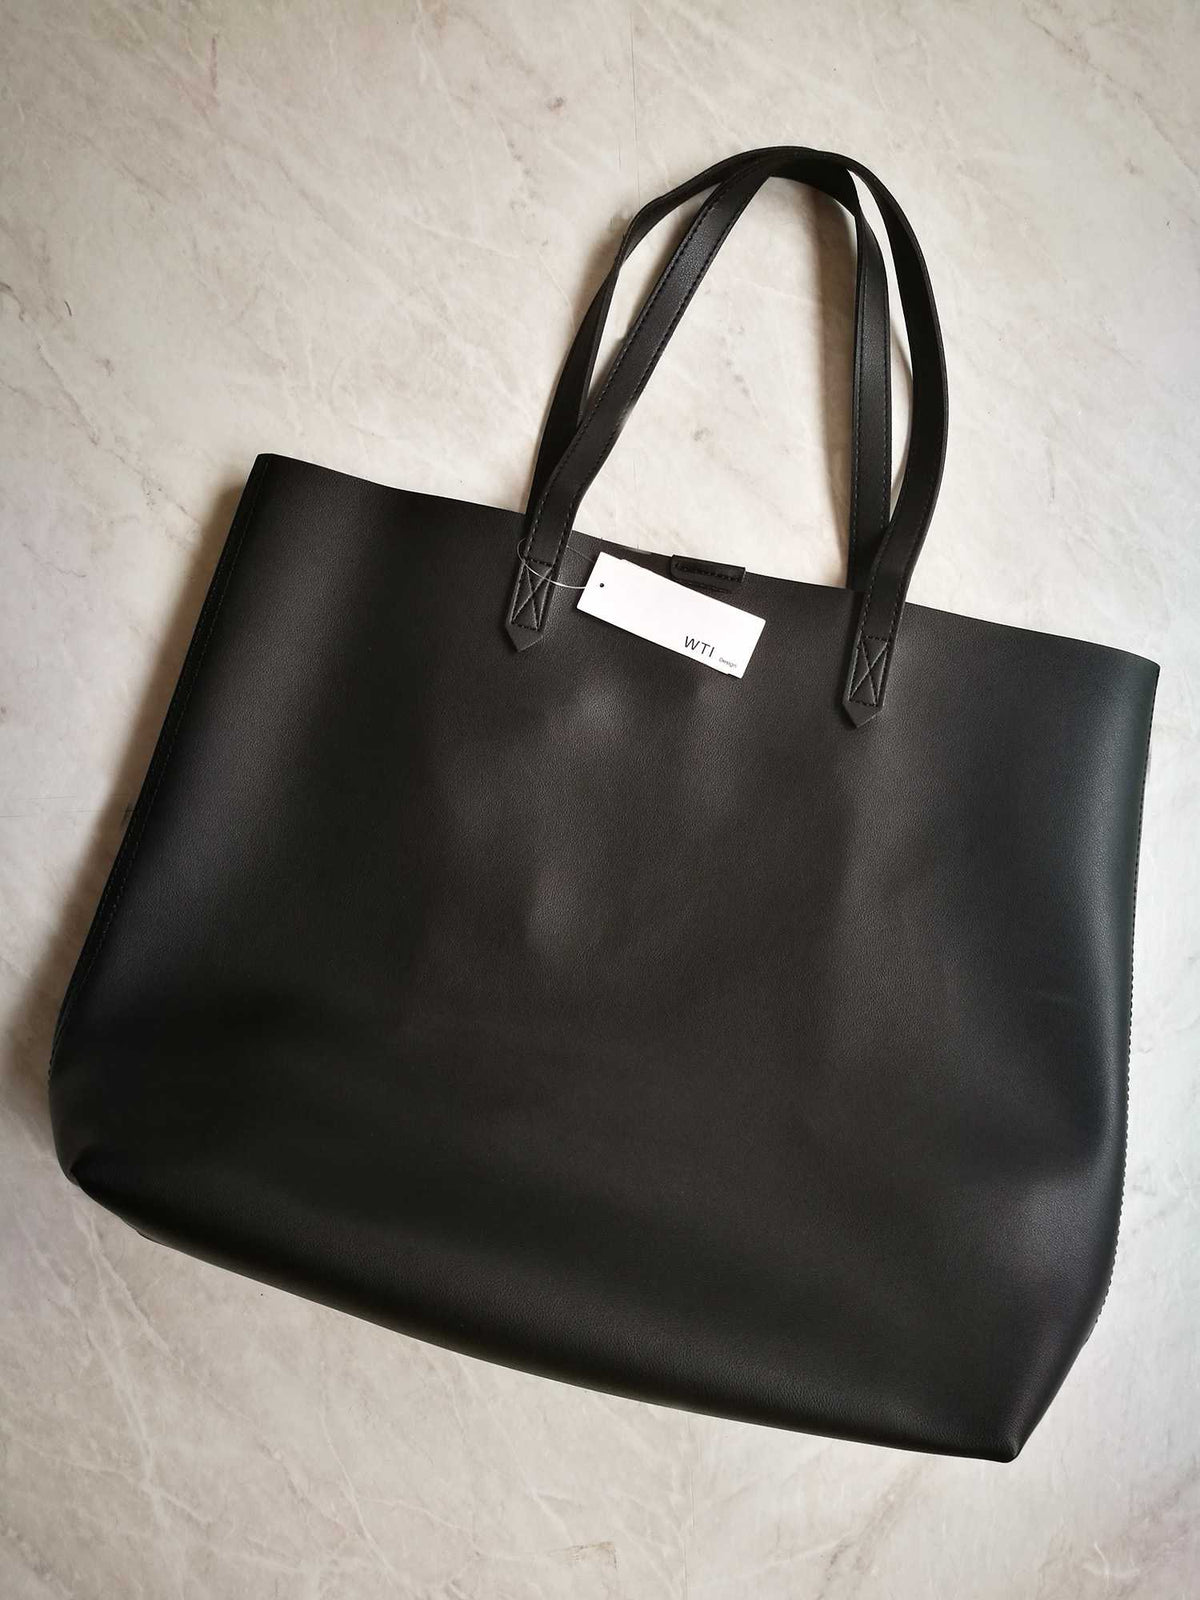 Oversized Tote Bag for Women: Black & Brown Leather Totes | Worthtryit ...